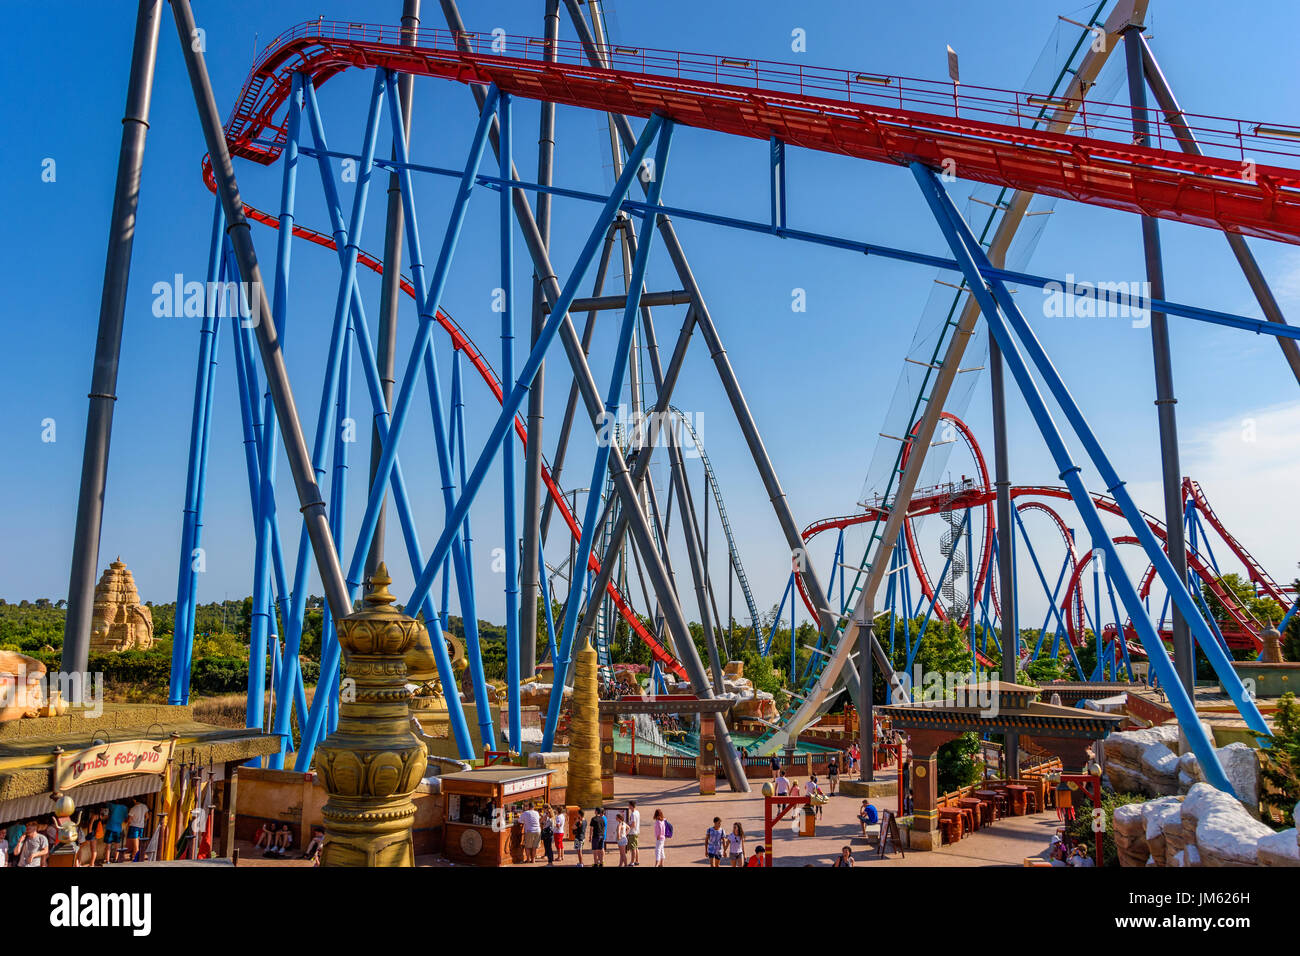 Shambhala is a steel Hyper Coaster roller coaster located at PortAventura in Salou, Spain. Its 256ft tall and 134km/h fast fahypercoaster Stock Photo